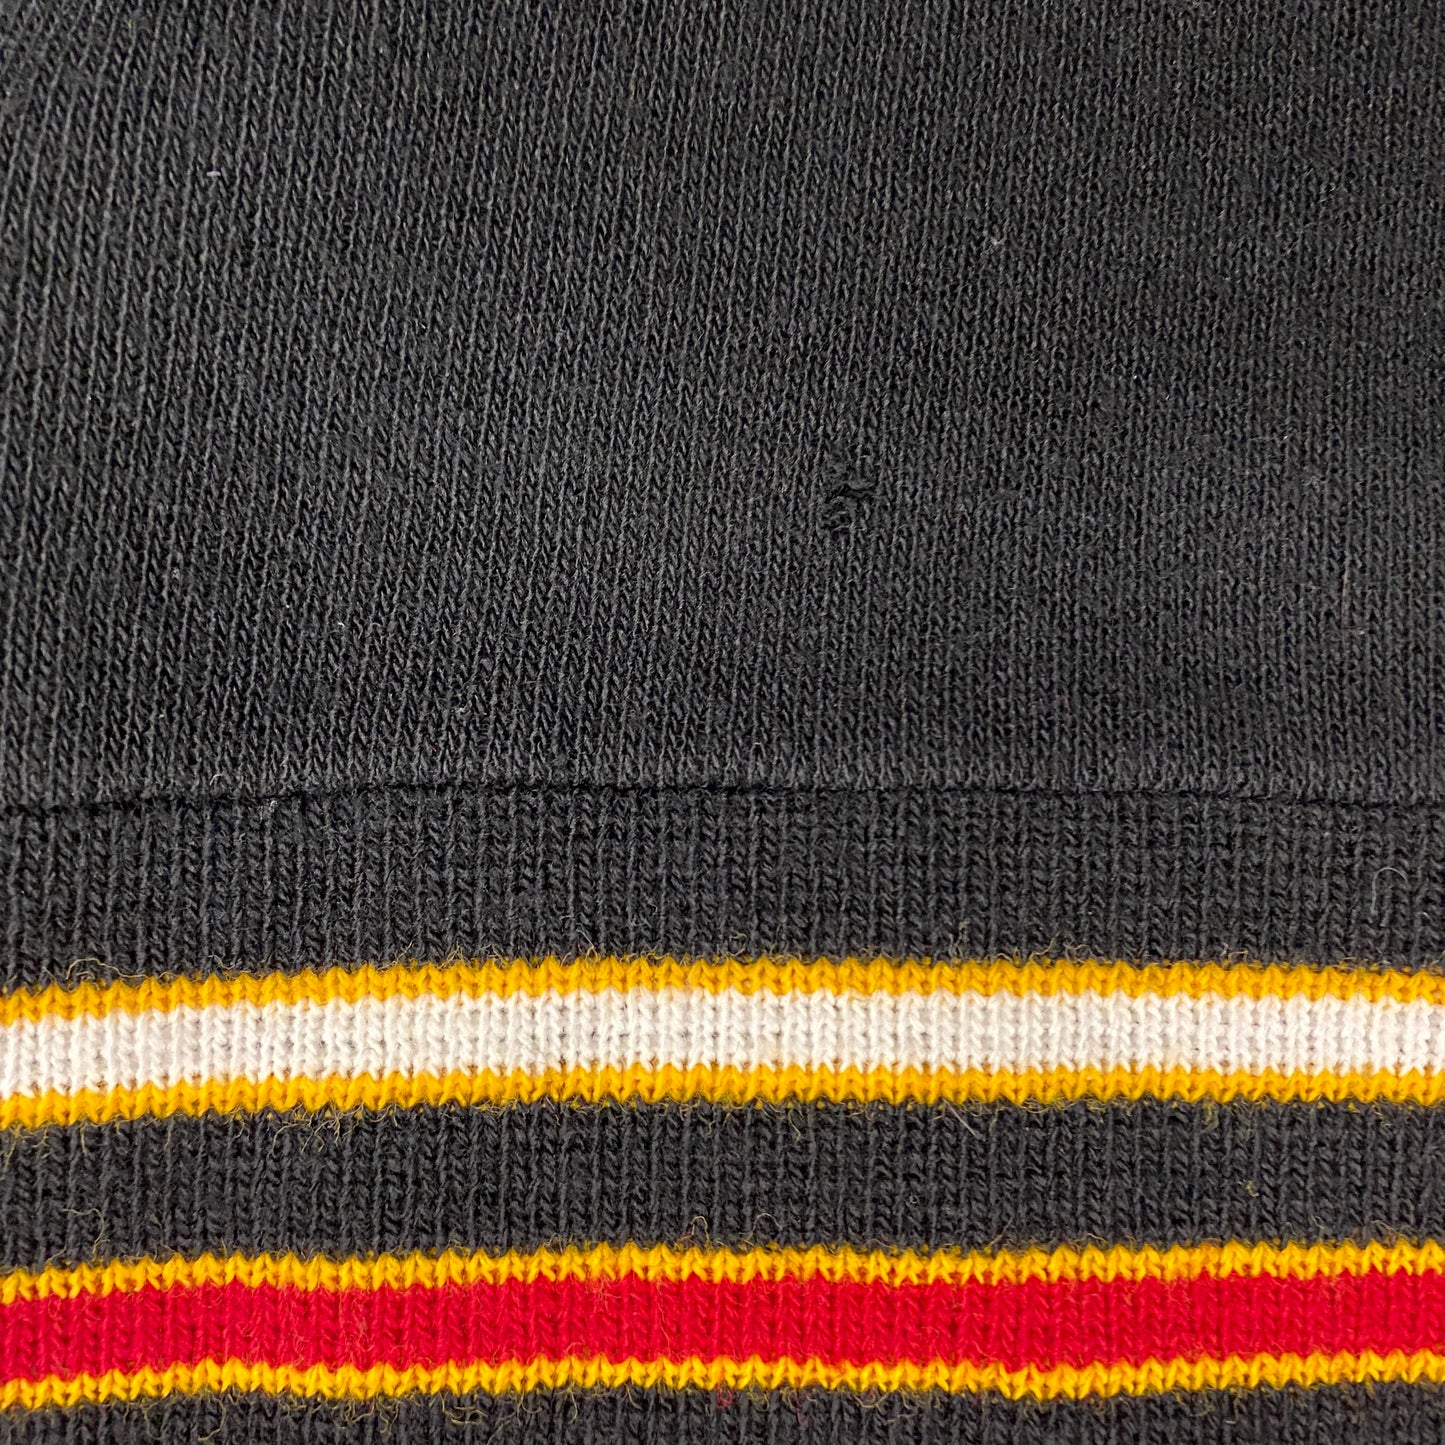 1980s Kingsport Black Striped Sweater - Size Medium (Tagged Large)